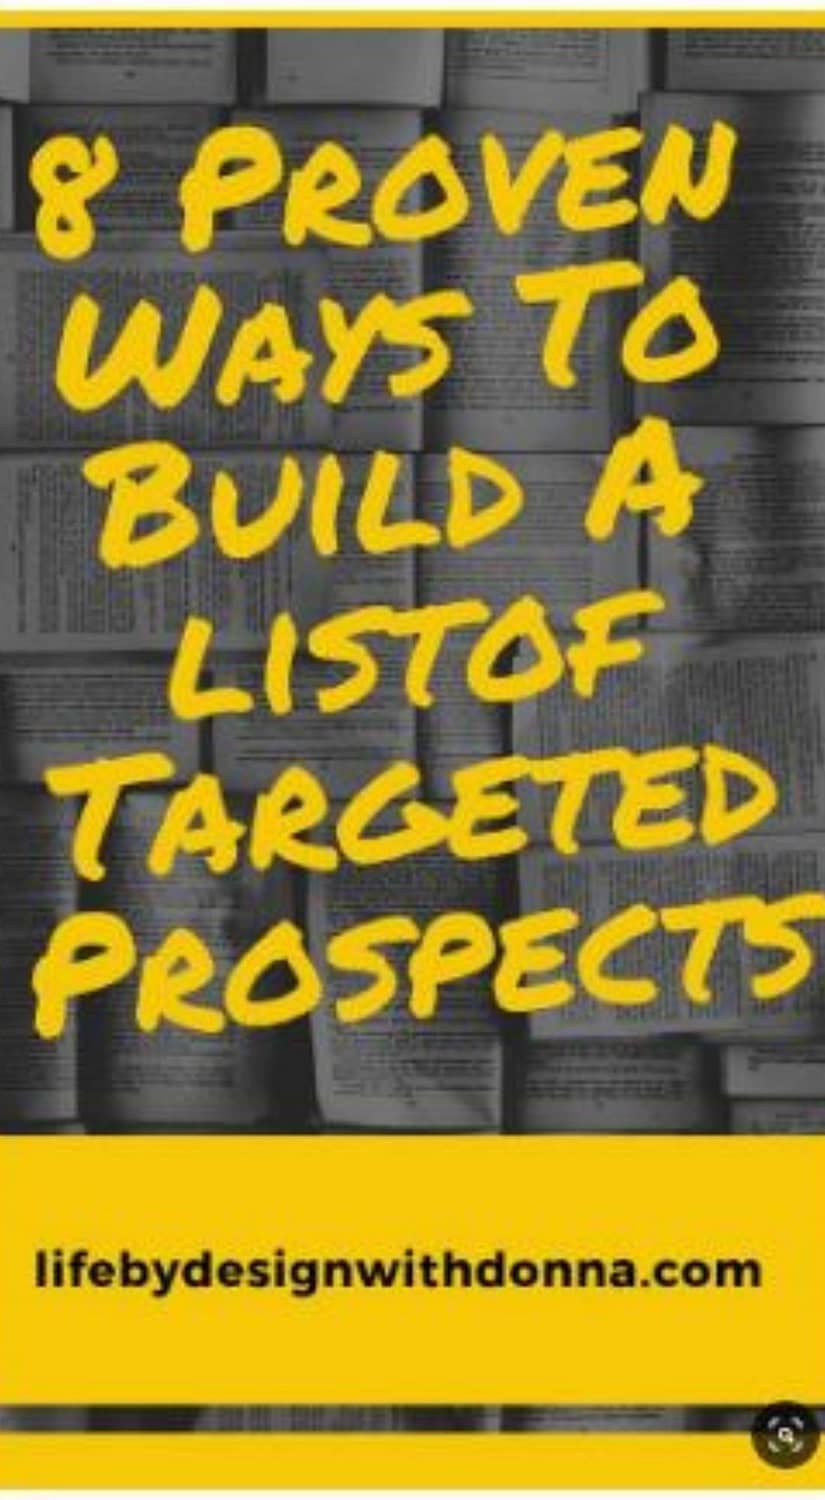 8 proven ways to build a list of targeted prospects